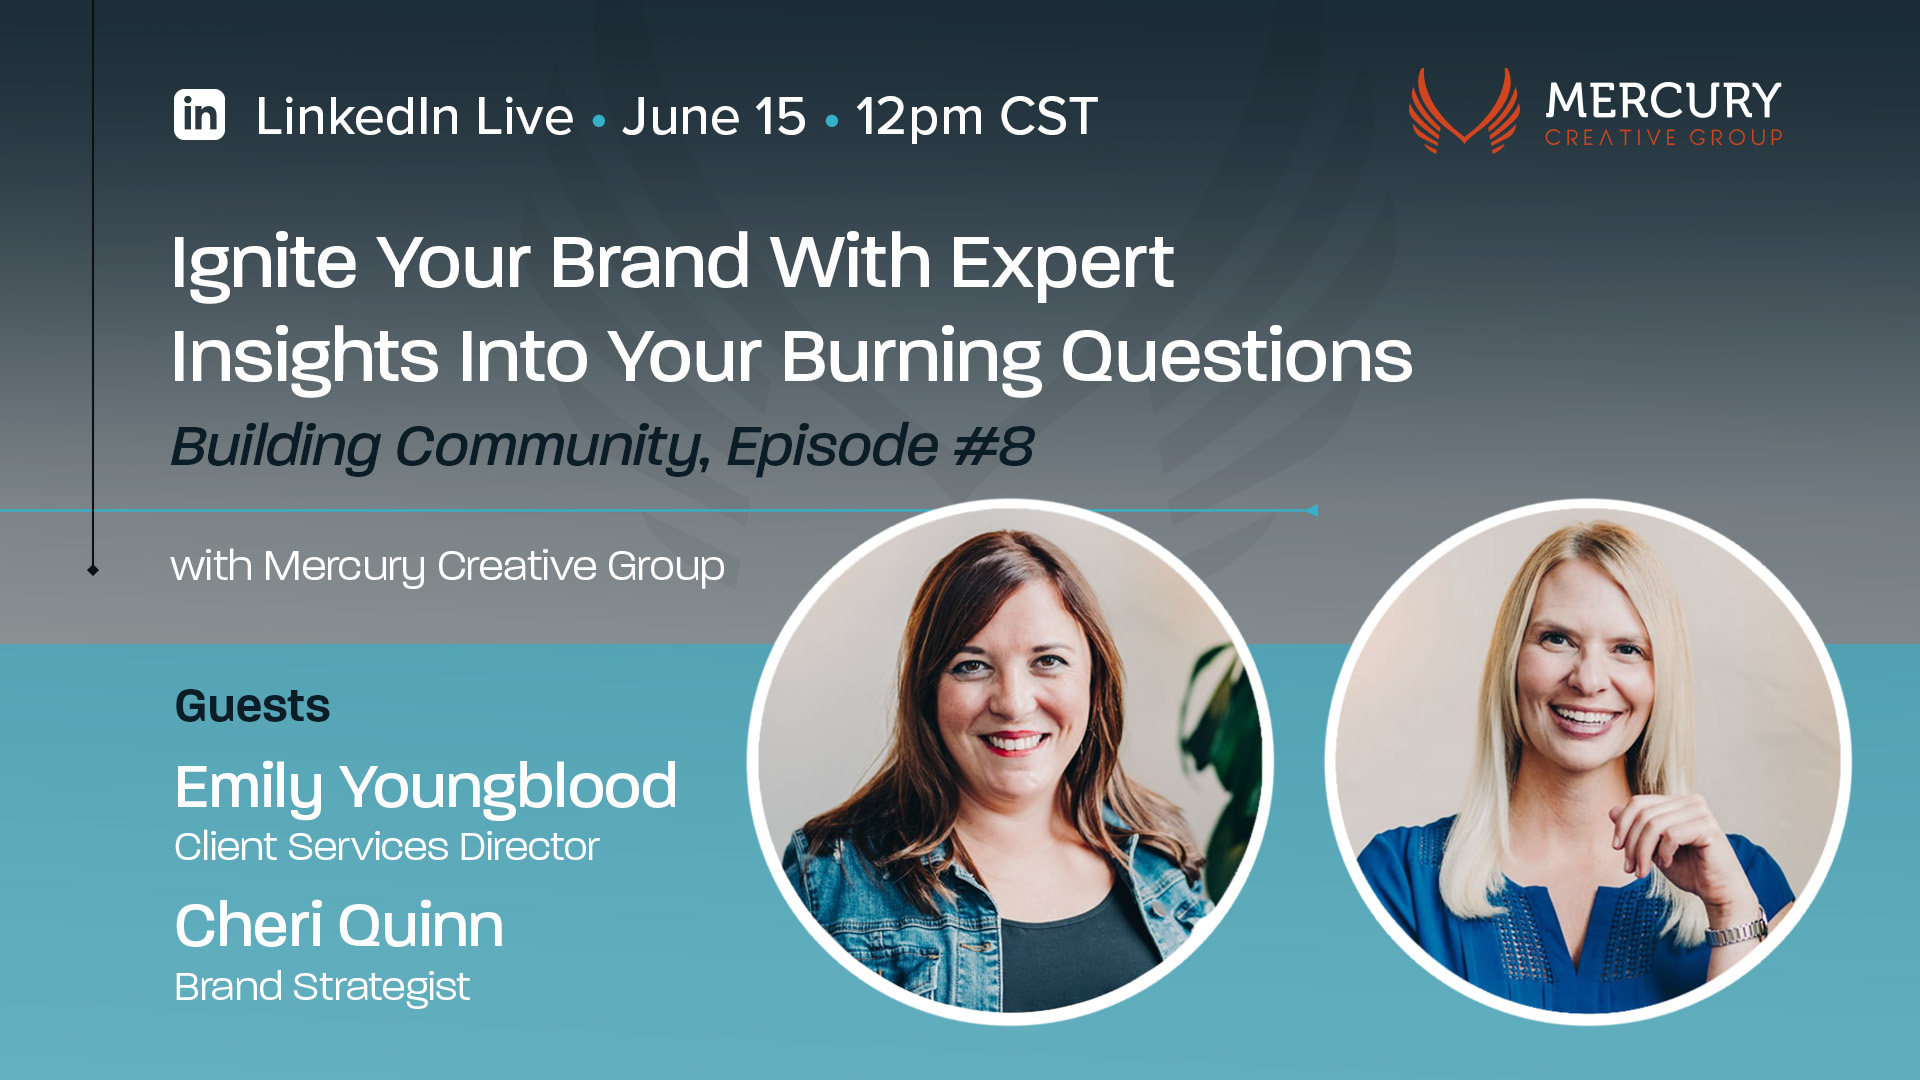 Ignite Your Brand with Expert Insights Into Your Burning Questions with Mercury Creative Group